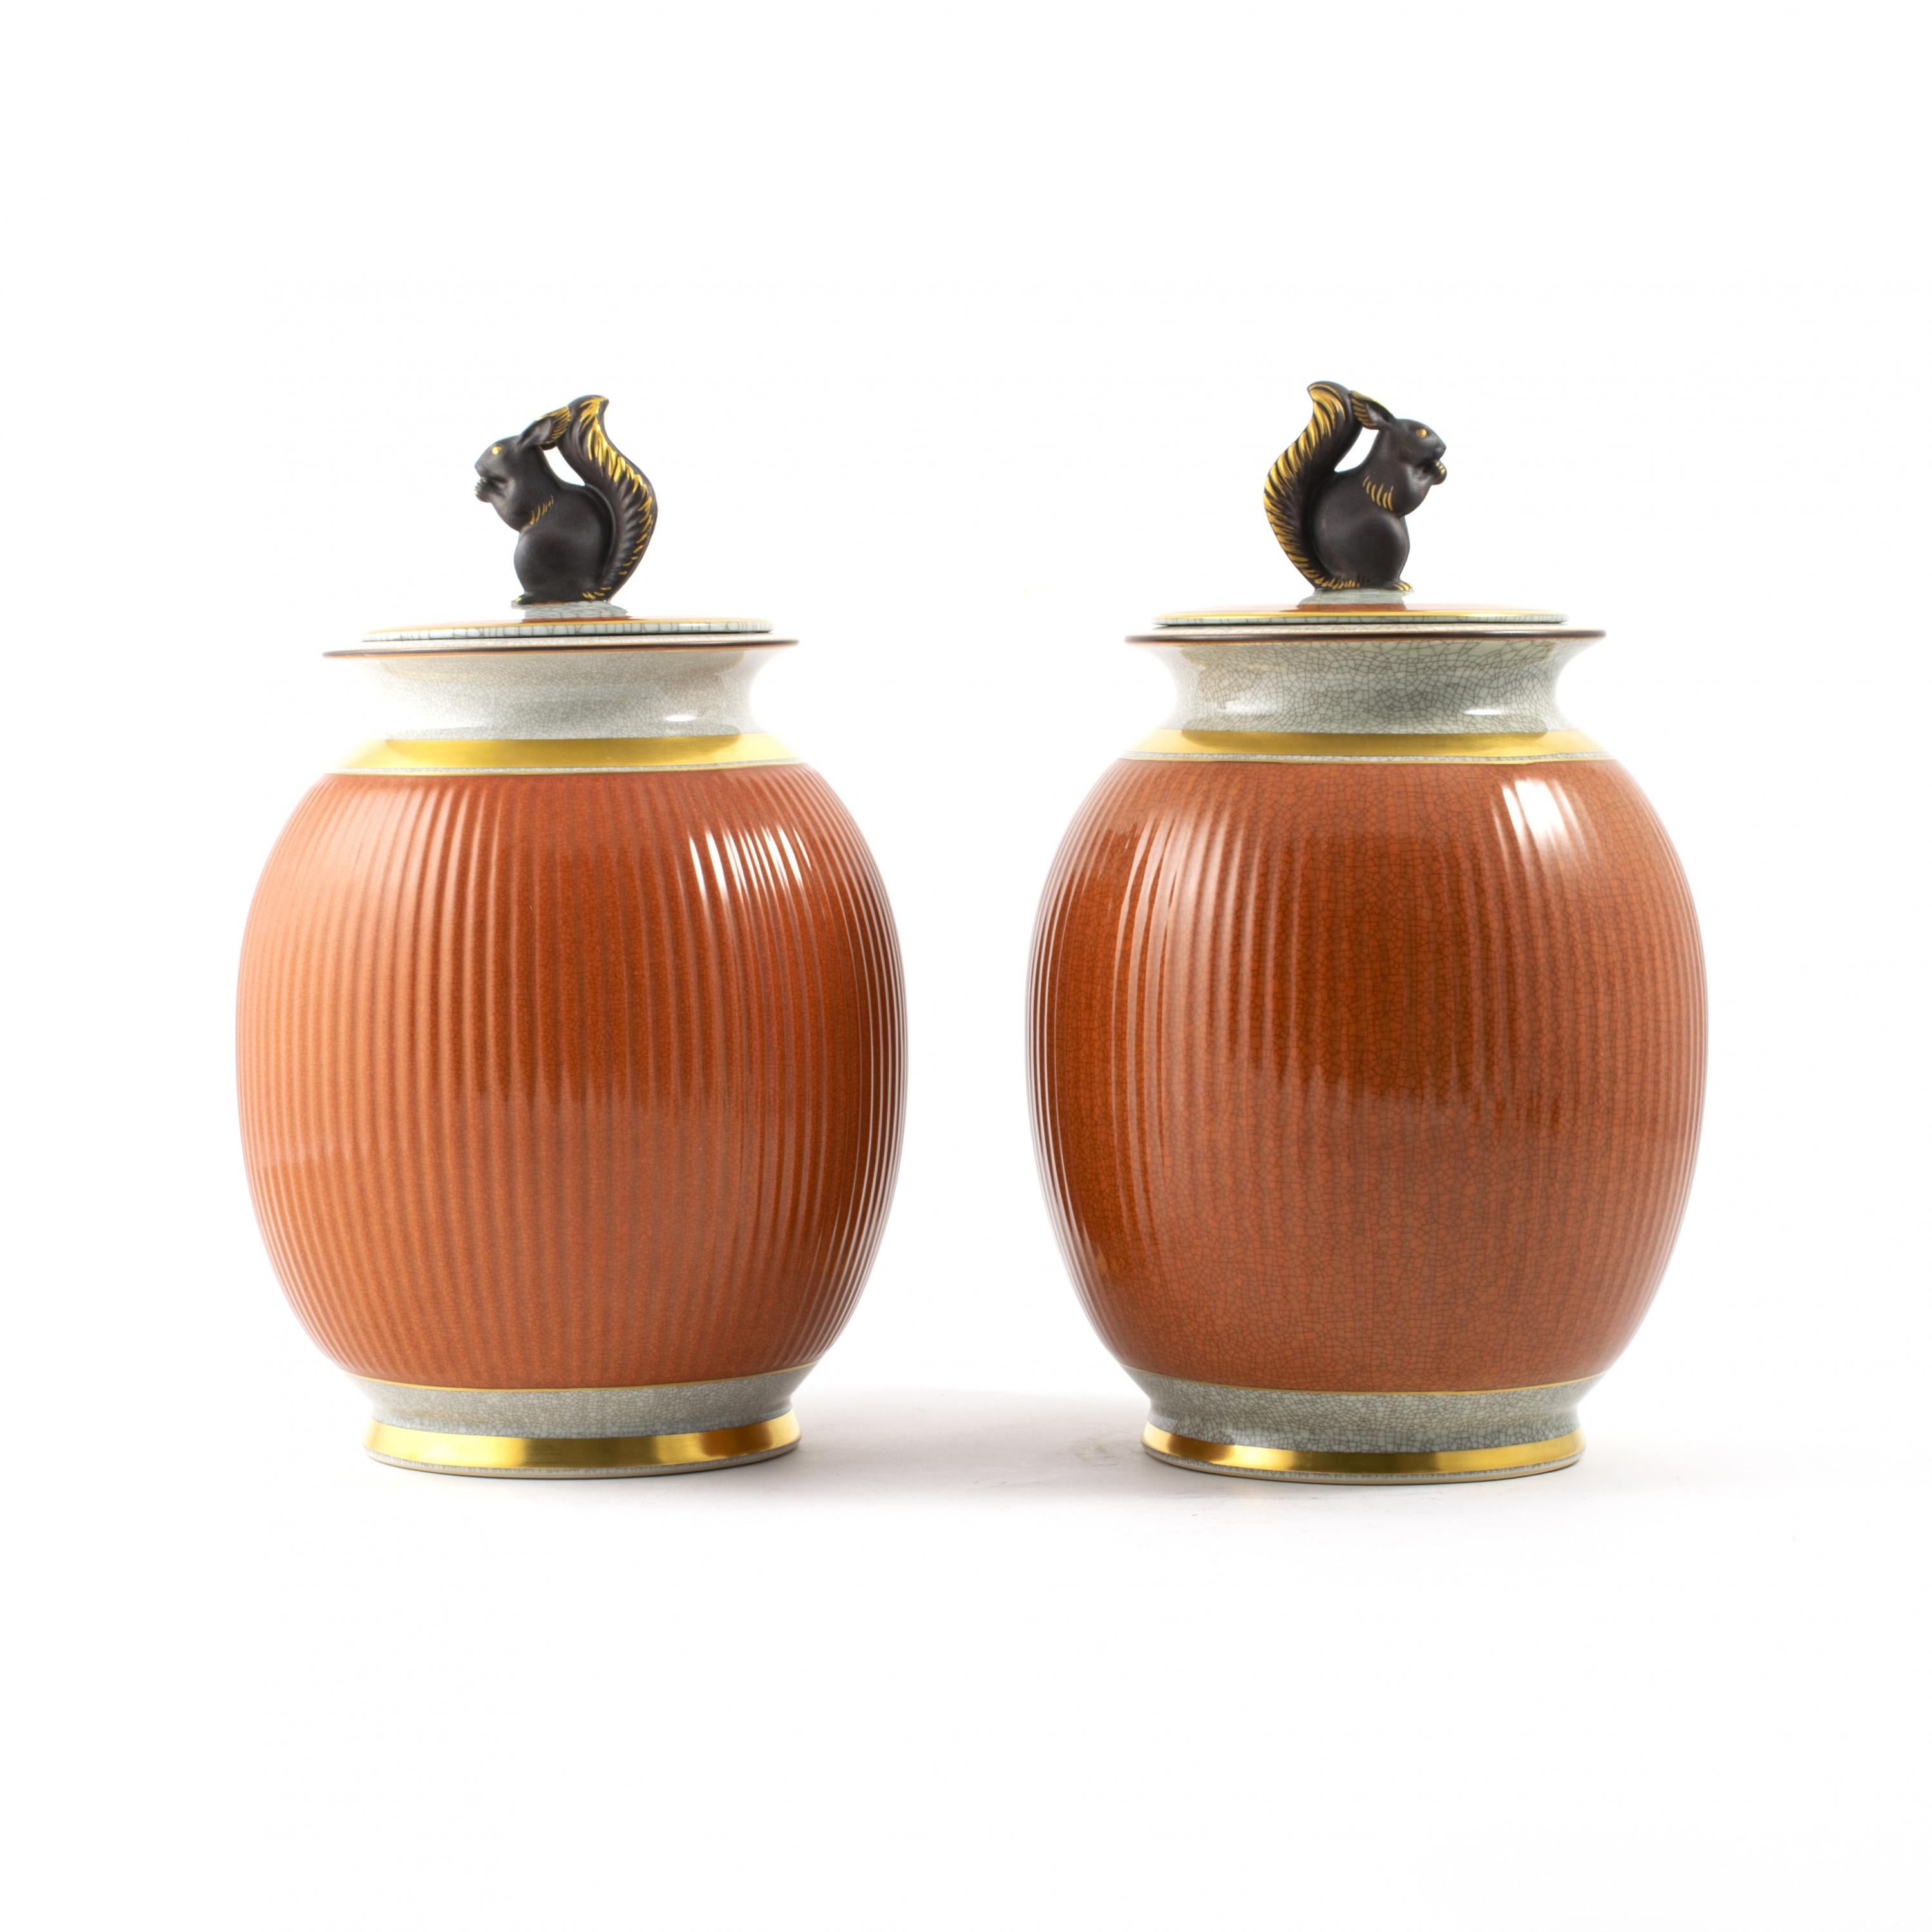 Pair of Royal Copenhagen porcelain vases.
Terra cotta and grey crackle glaze with gold trim and lid decorated with a squirrel.
Very decorative both with and without lid.
Stamped and numbered underneath.
Sold as a pair.

Measurement (cm):